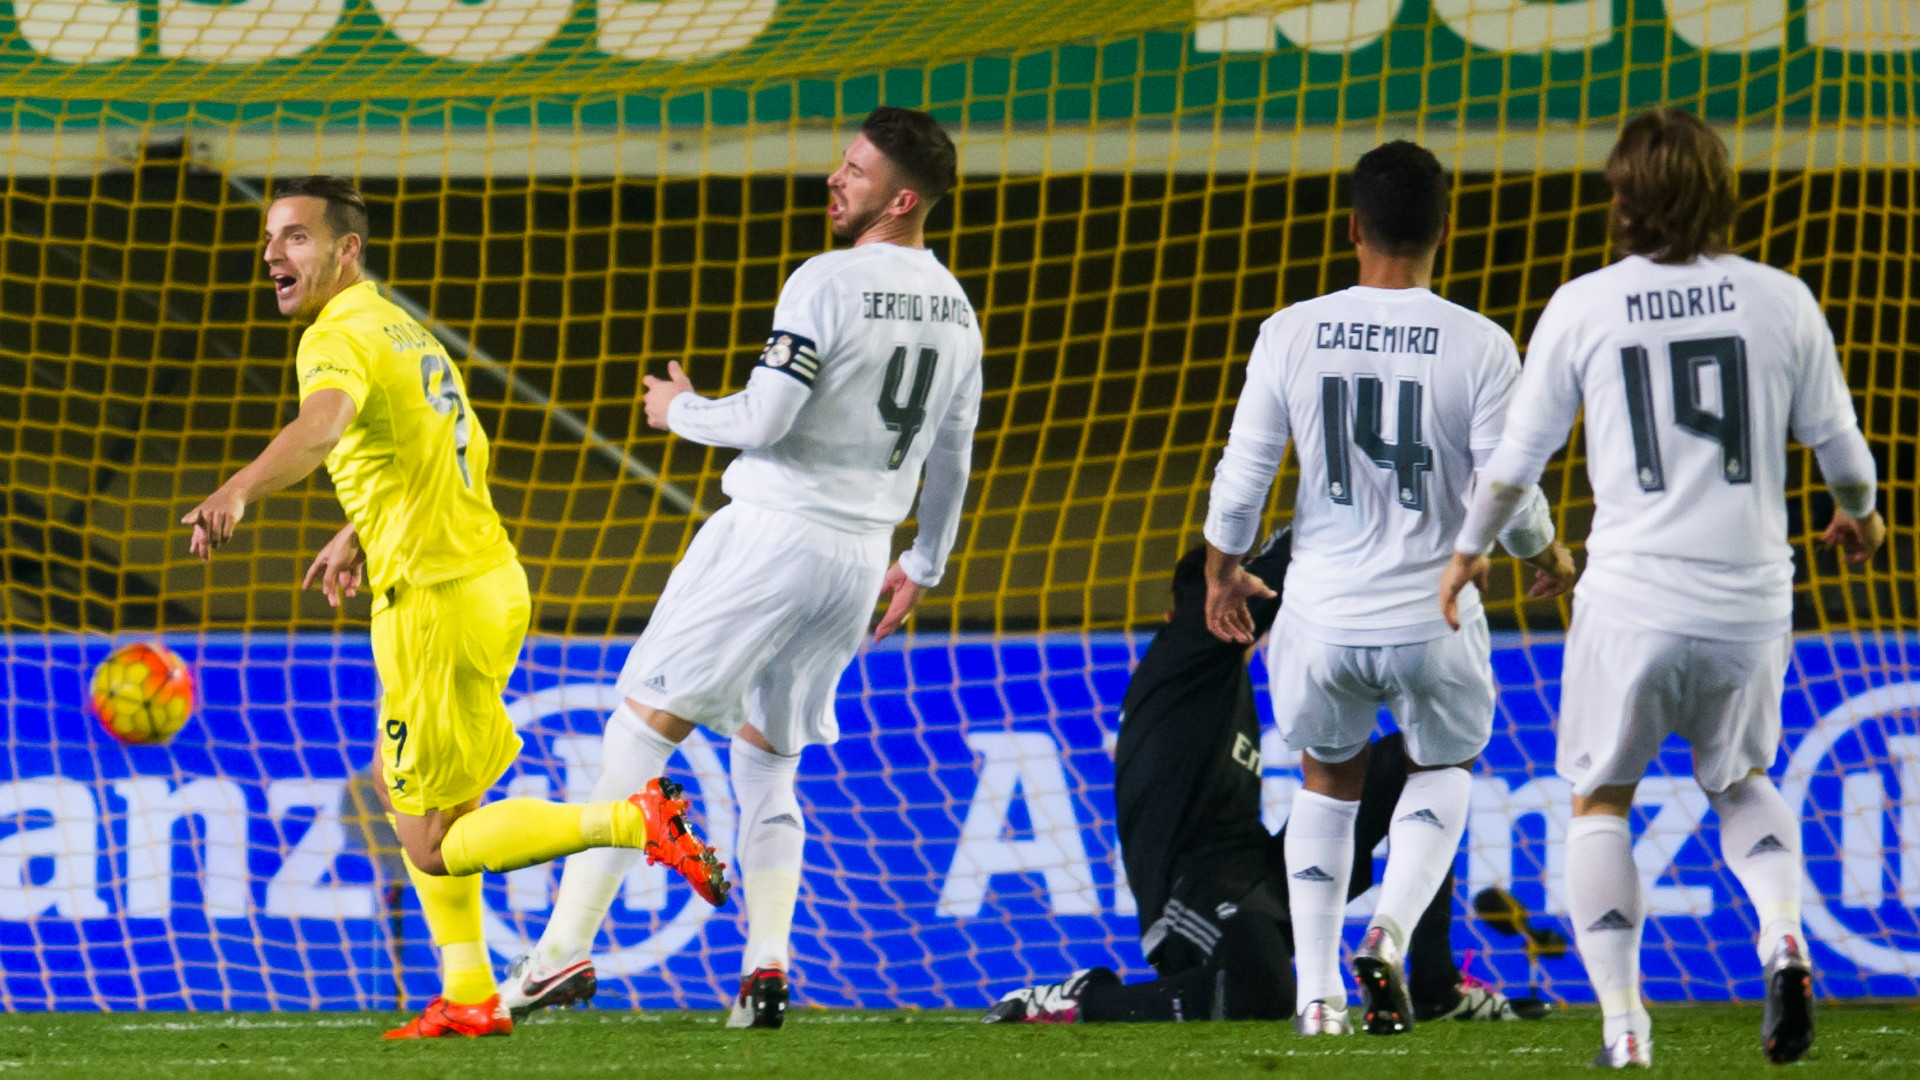 Can unbeaten Villarreal compete against Real Madrid and their 100% record?